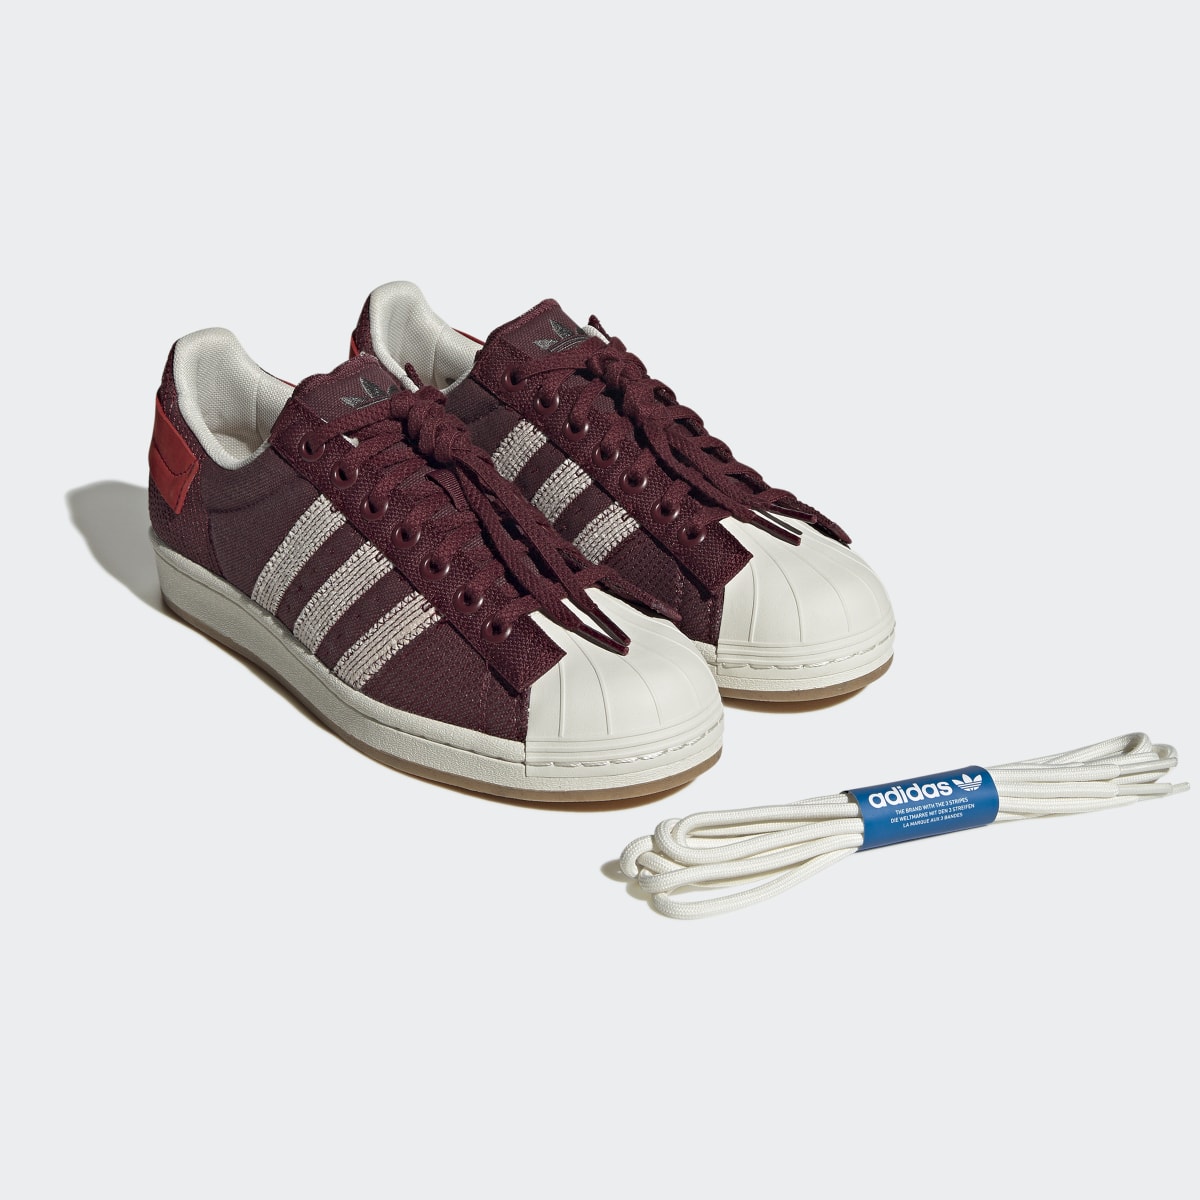 Adidas Superstar Parley Shoes. 13